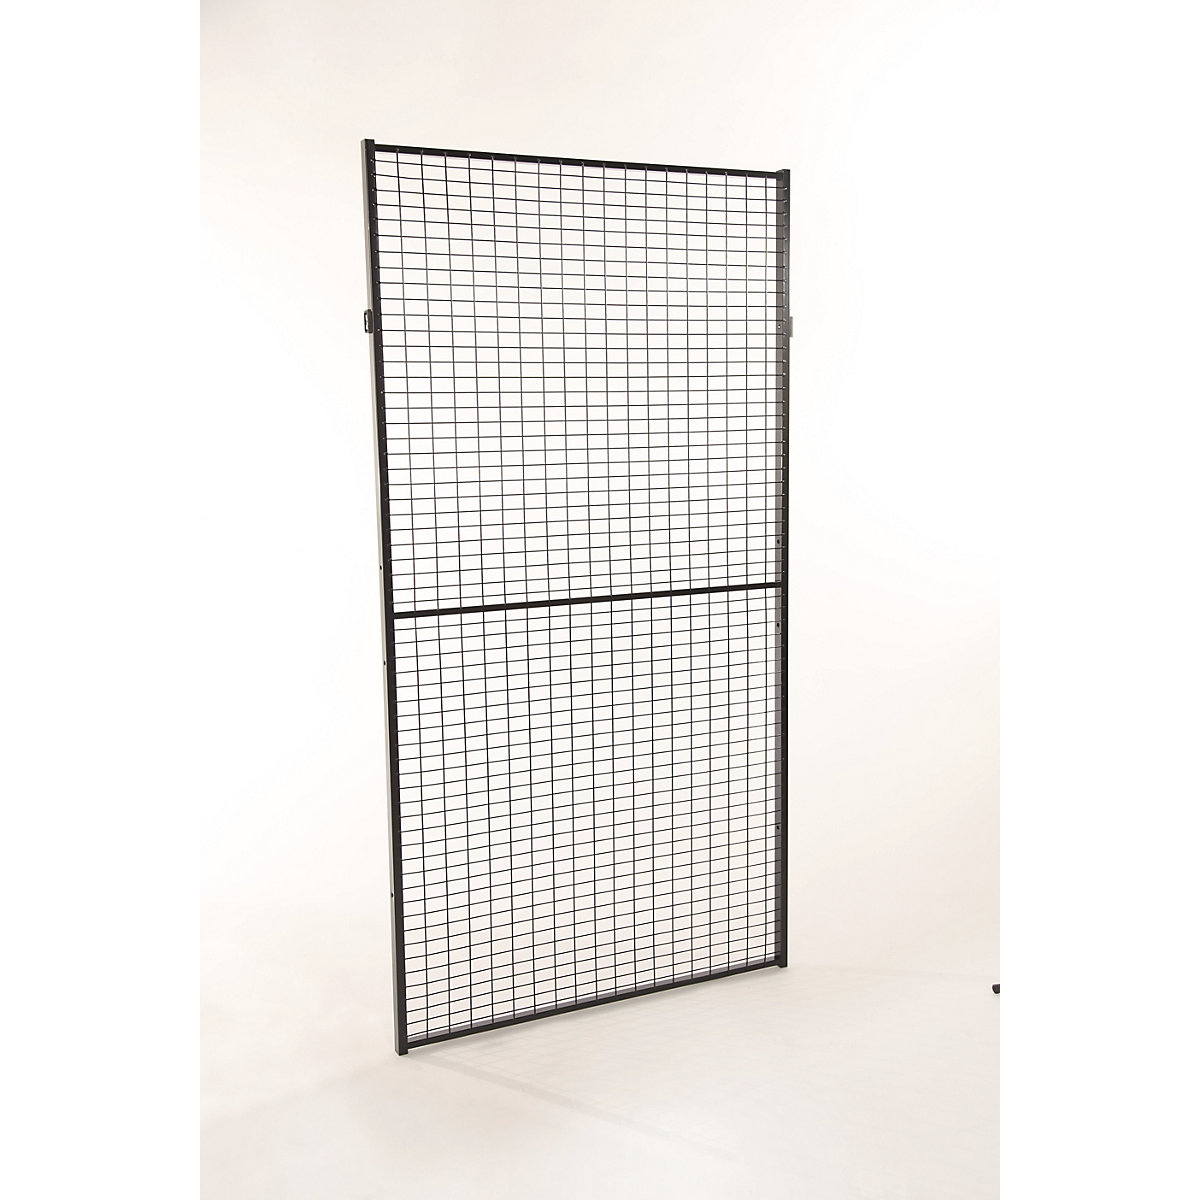 Axelent – X-GUARD CLASSIC machine protective fencing, wall section, height 1900 mm, width 700 mm